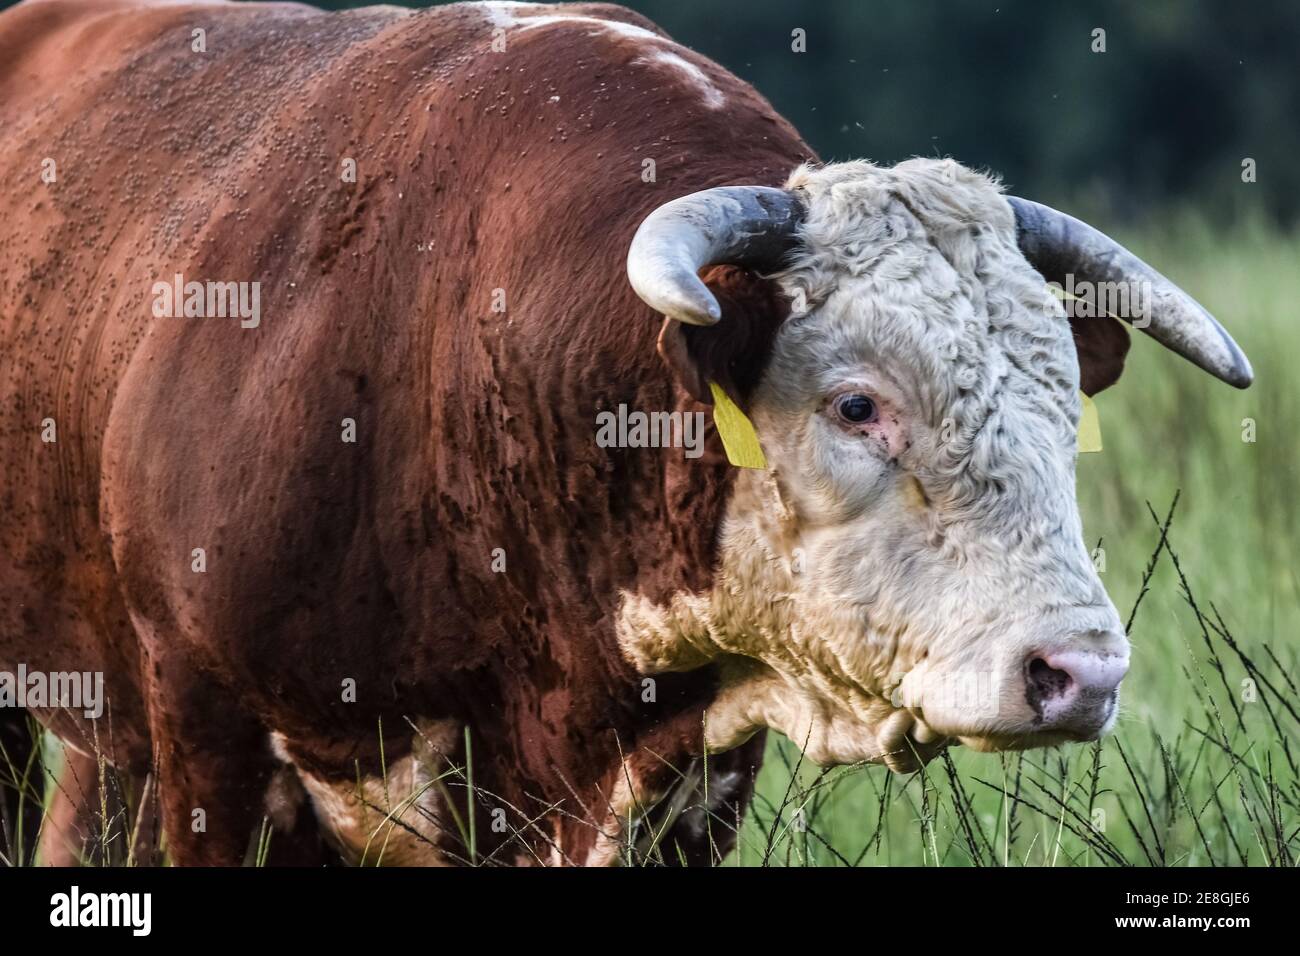 Red and white Hereford bull covered in horn flies Stock Photo